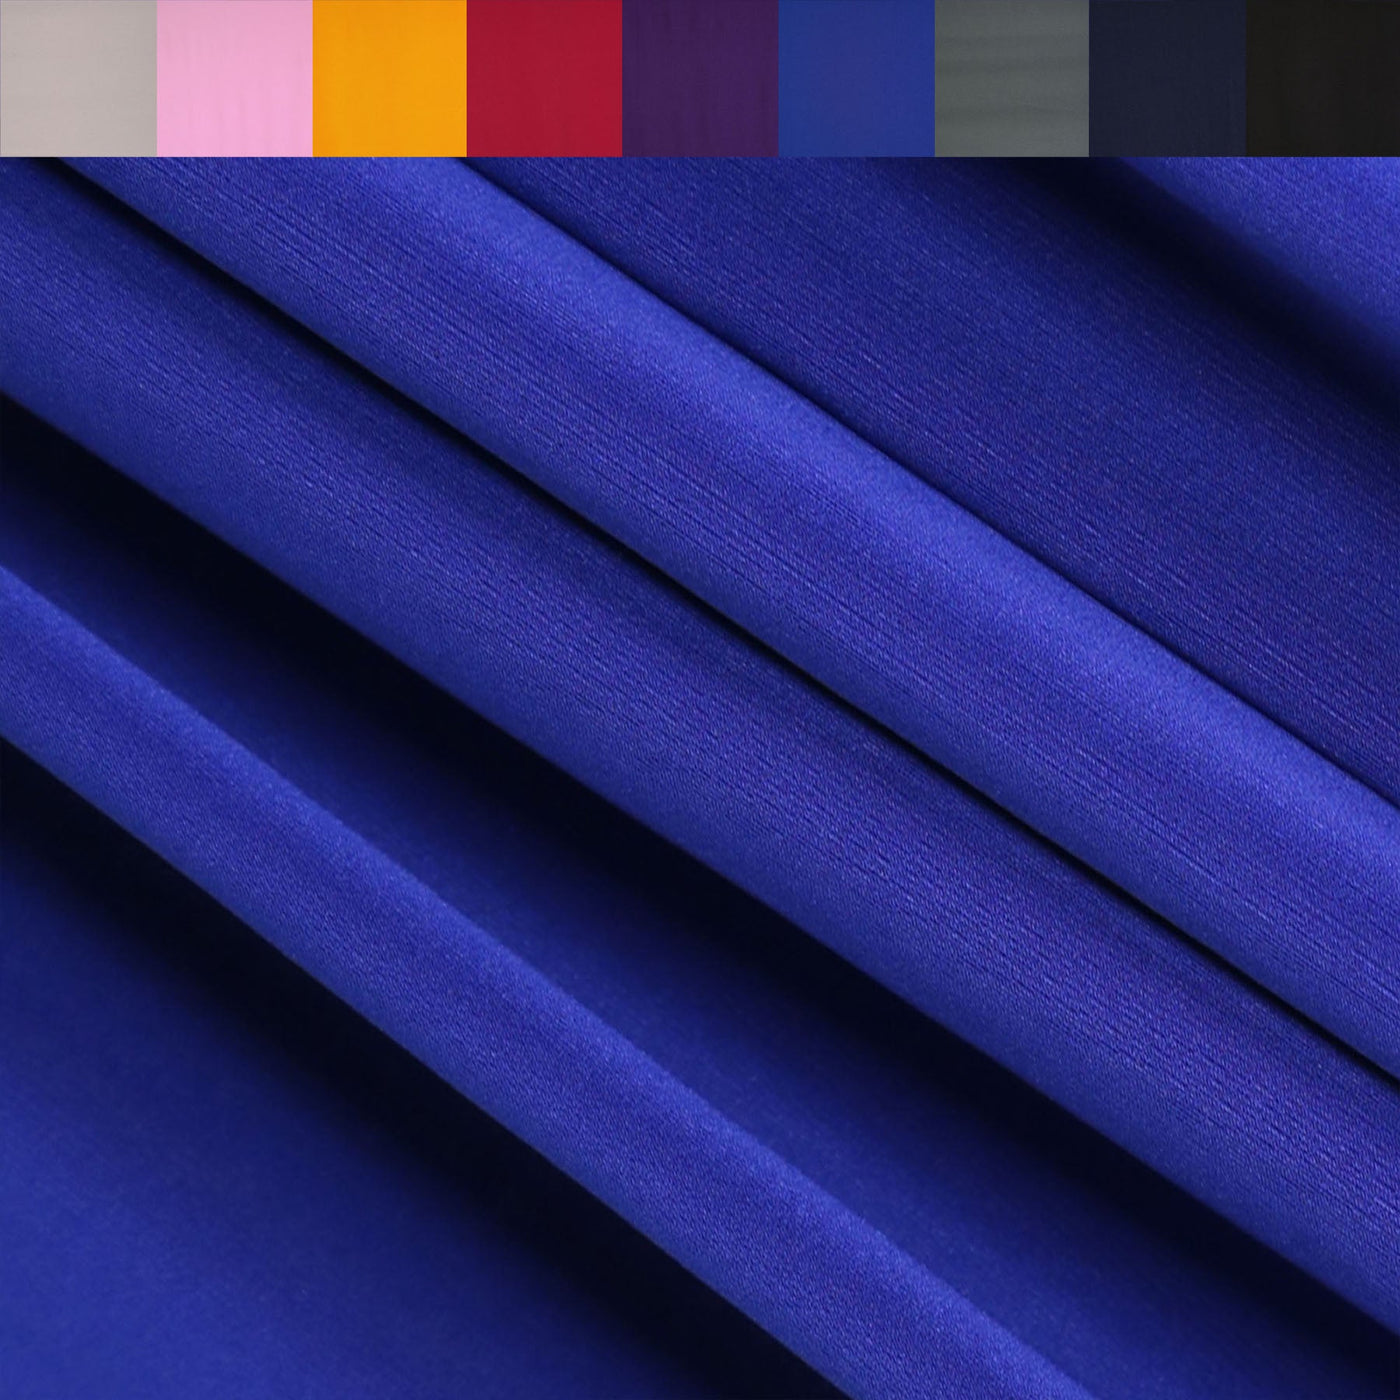 FabricLA ITY Knit Jersey Polyester Spandex Fabric by The Yard - 60 Inch  Wide, 2-Way Stretch - Costumes & Dancewear 